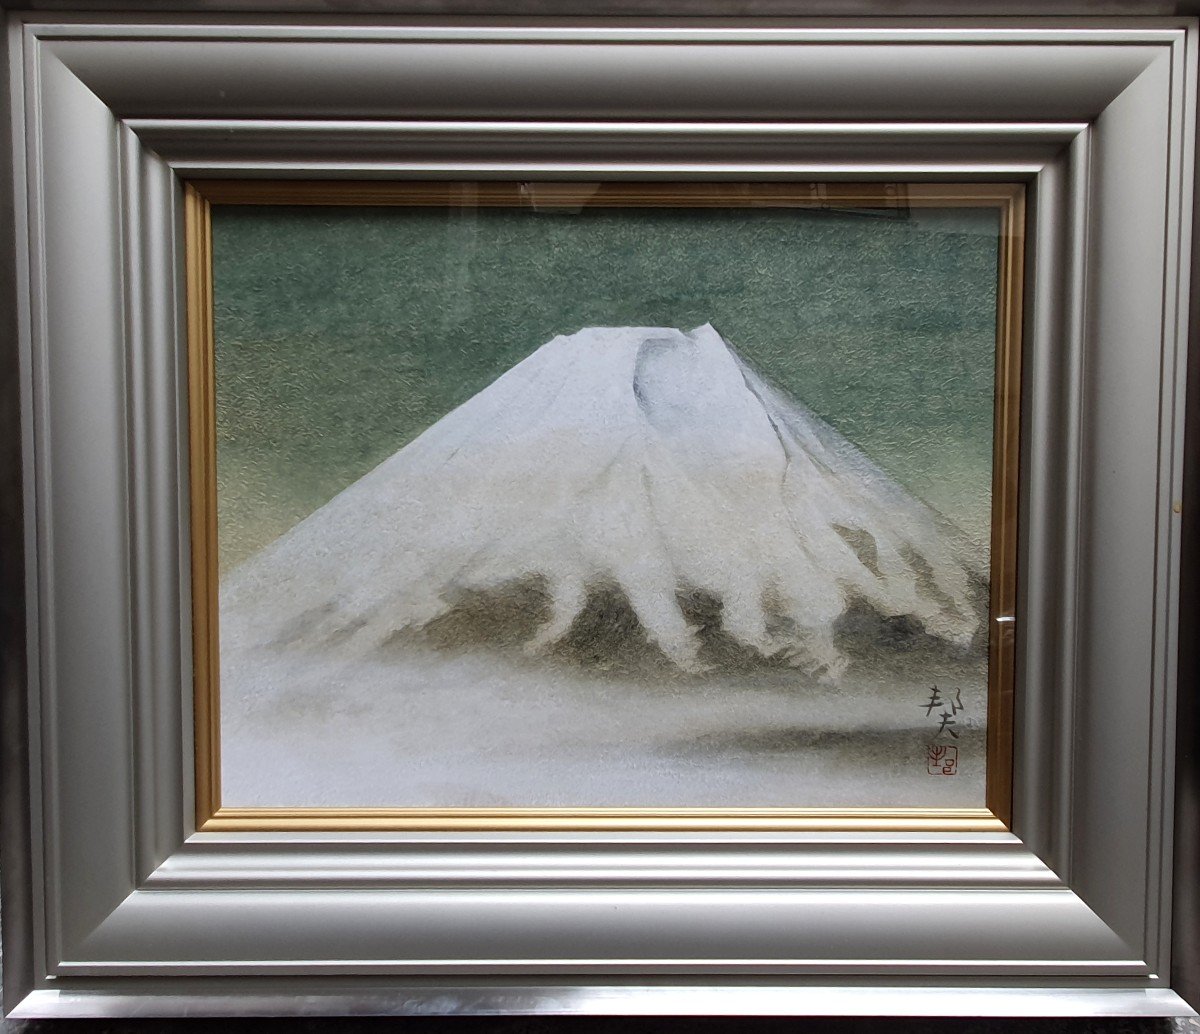 Mount Fuji In Japan Mixed Media On Paper By A Japanese Artist-photo-2